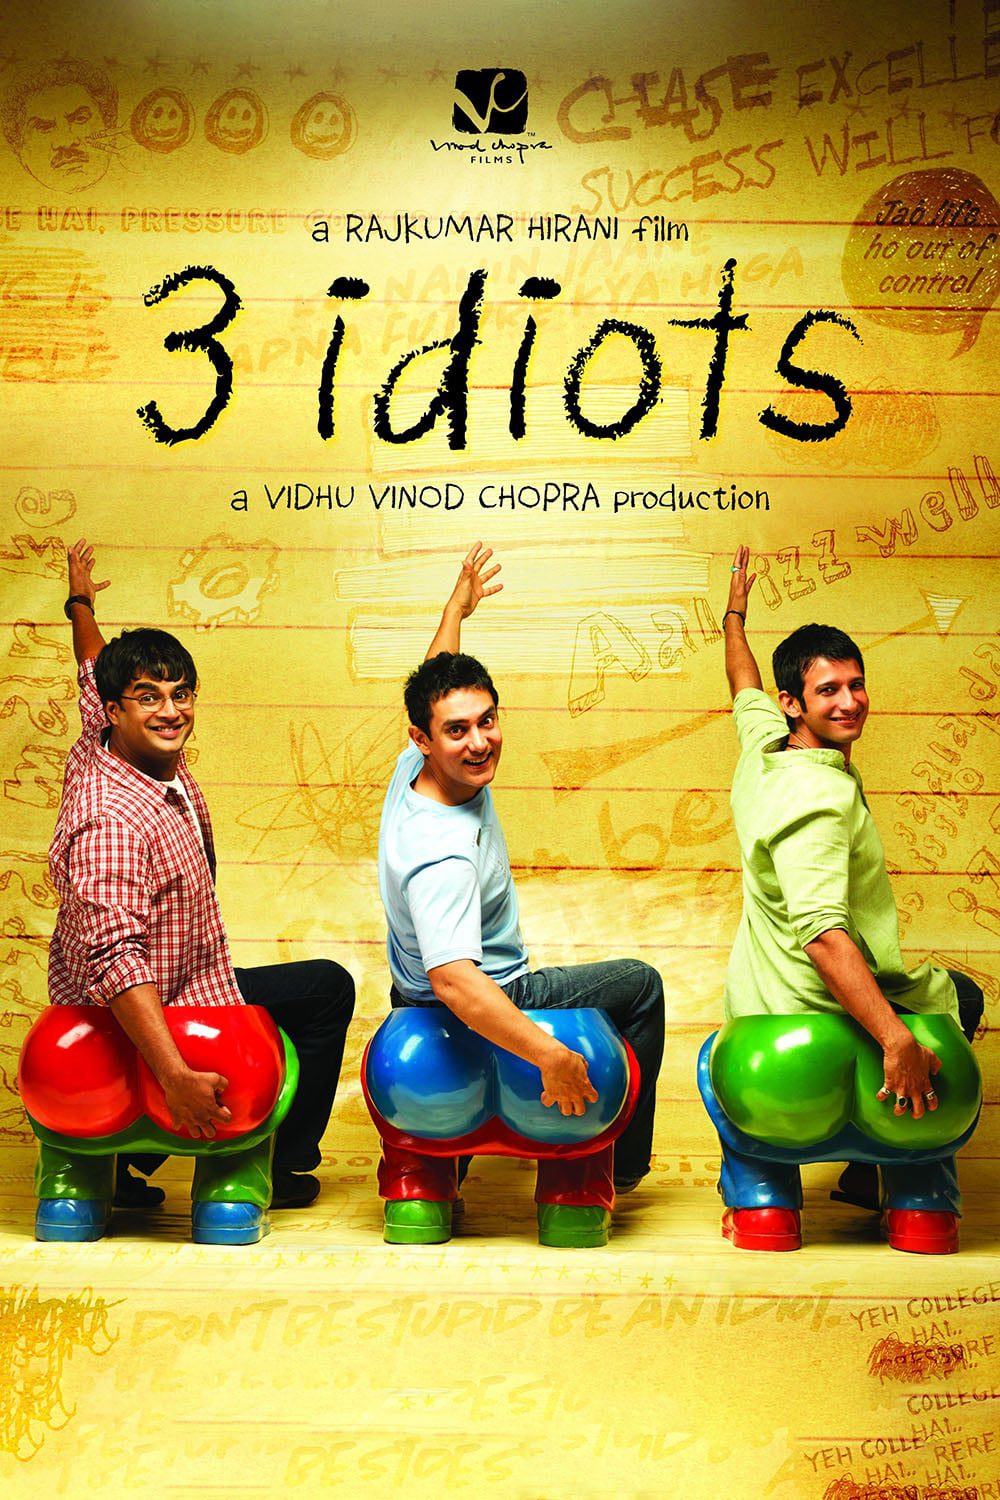 Poster for the movie "3 Idiots"